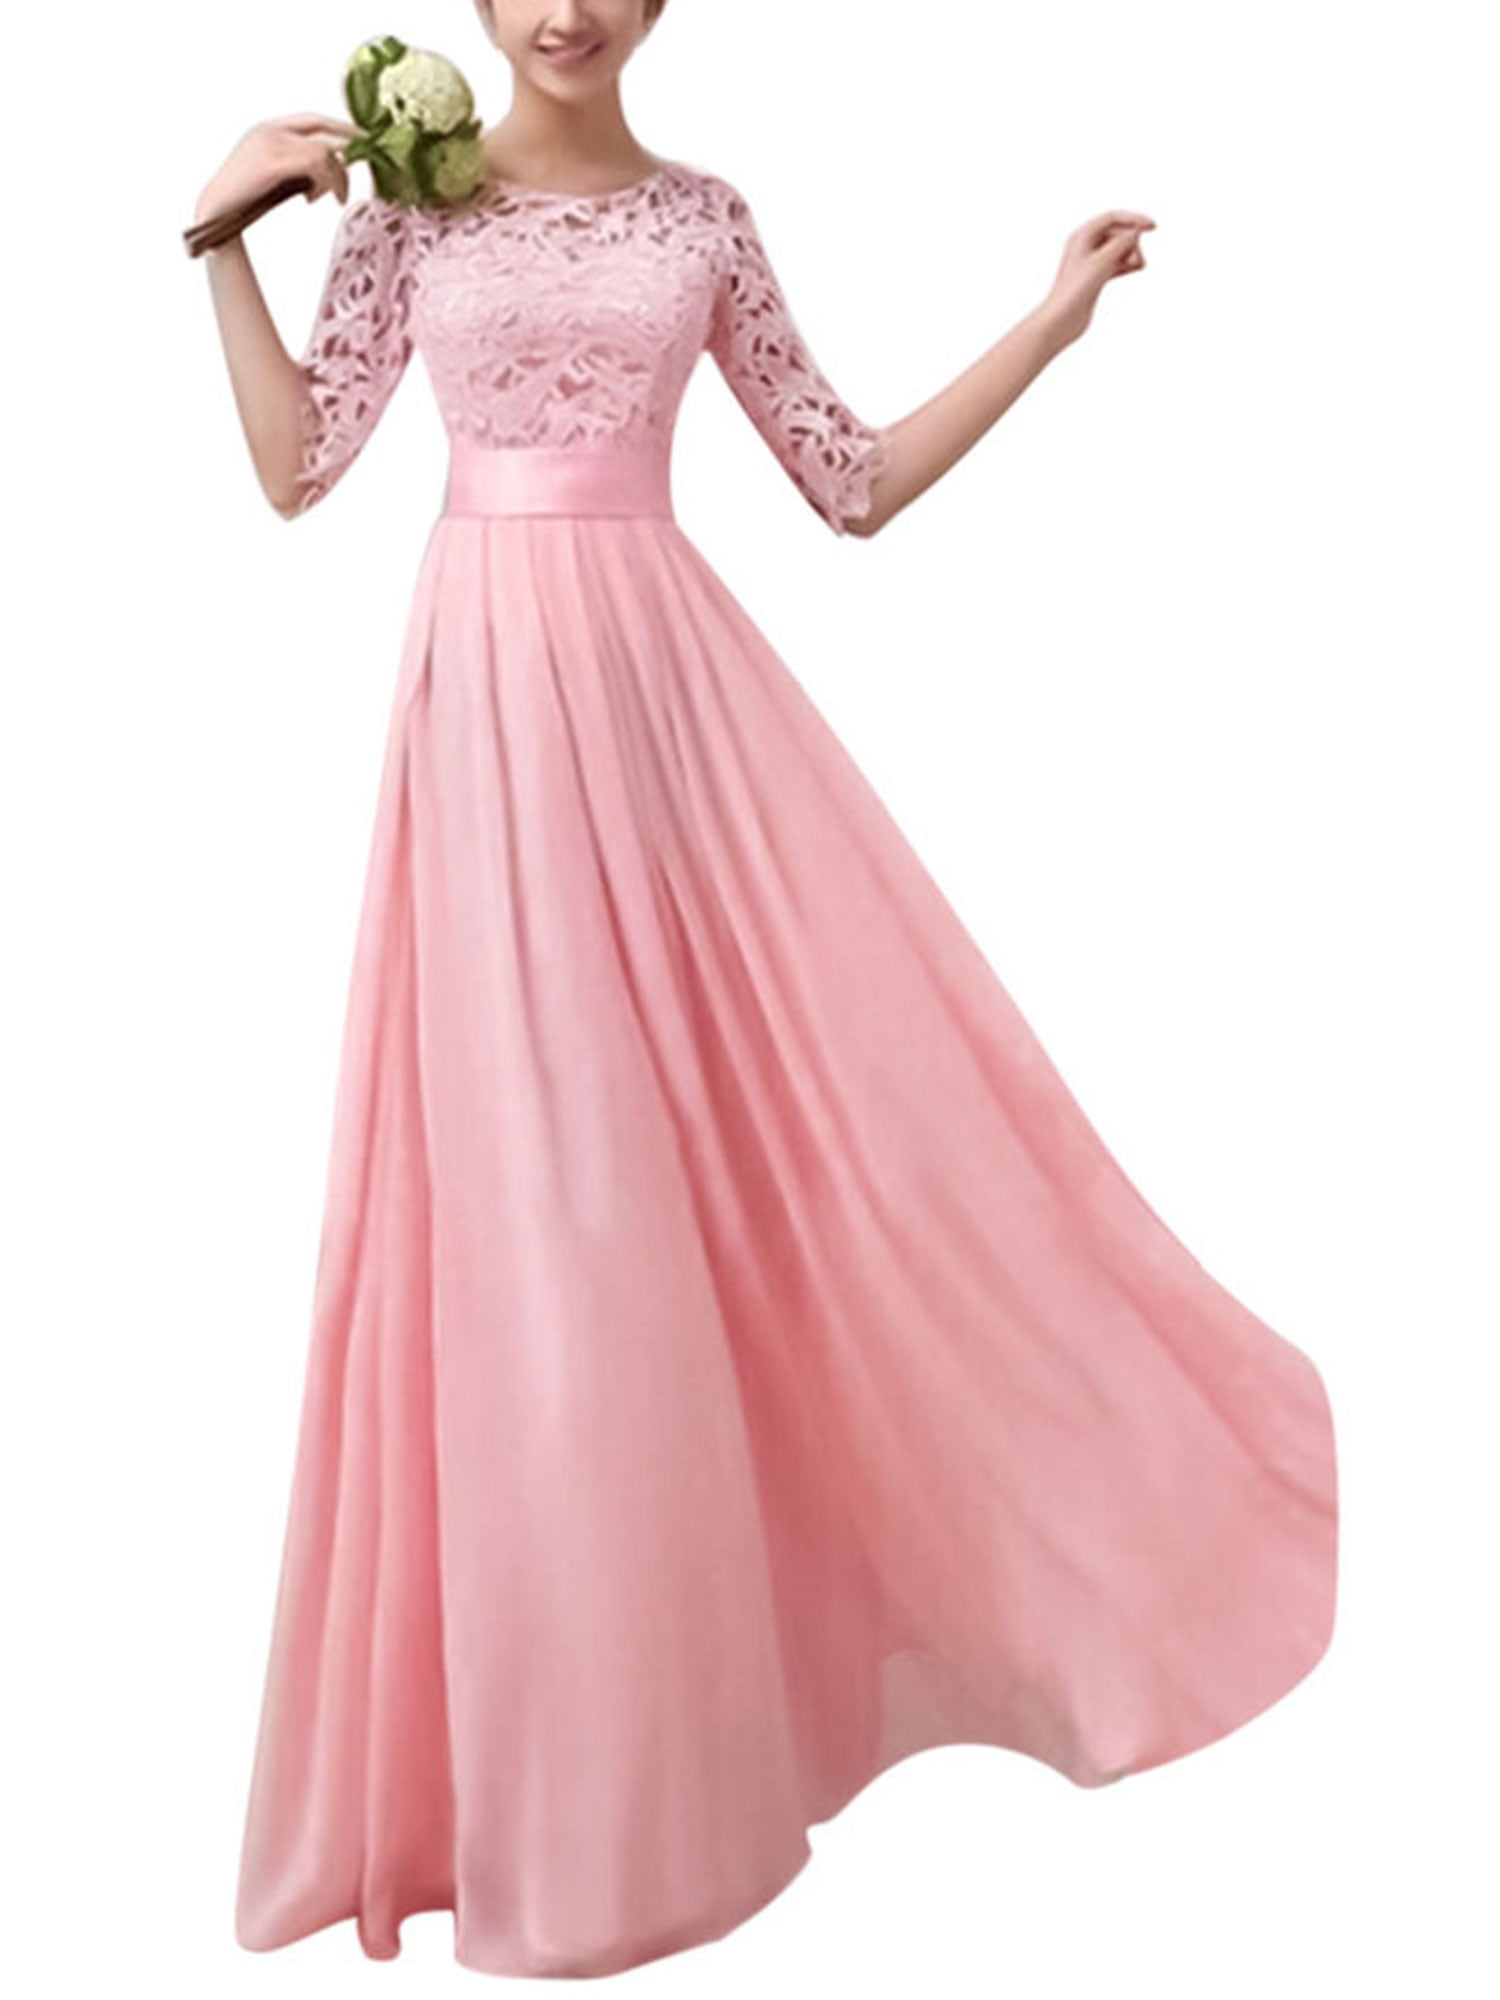 Women Bridesmaid Wedding Formal Lace Maxi Dress Cocktail Party Ball Gown Prom